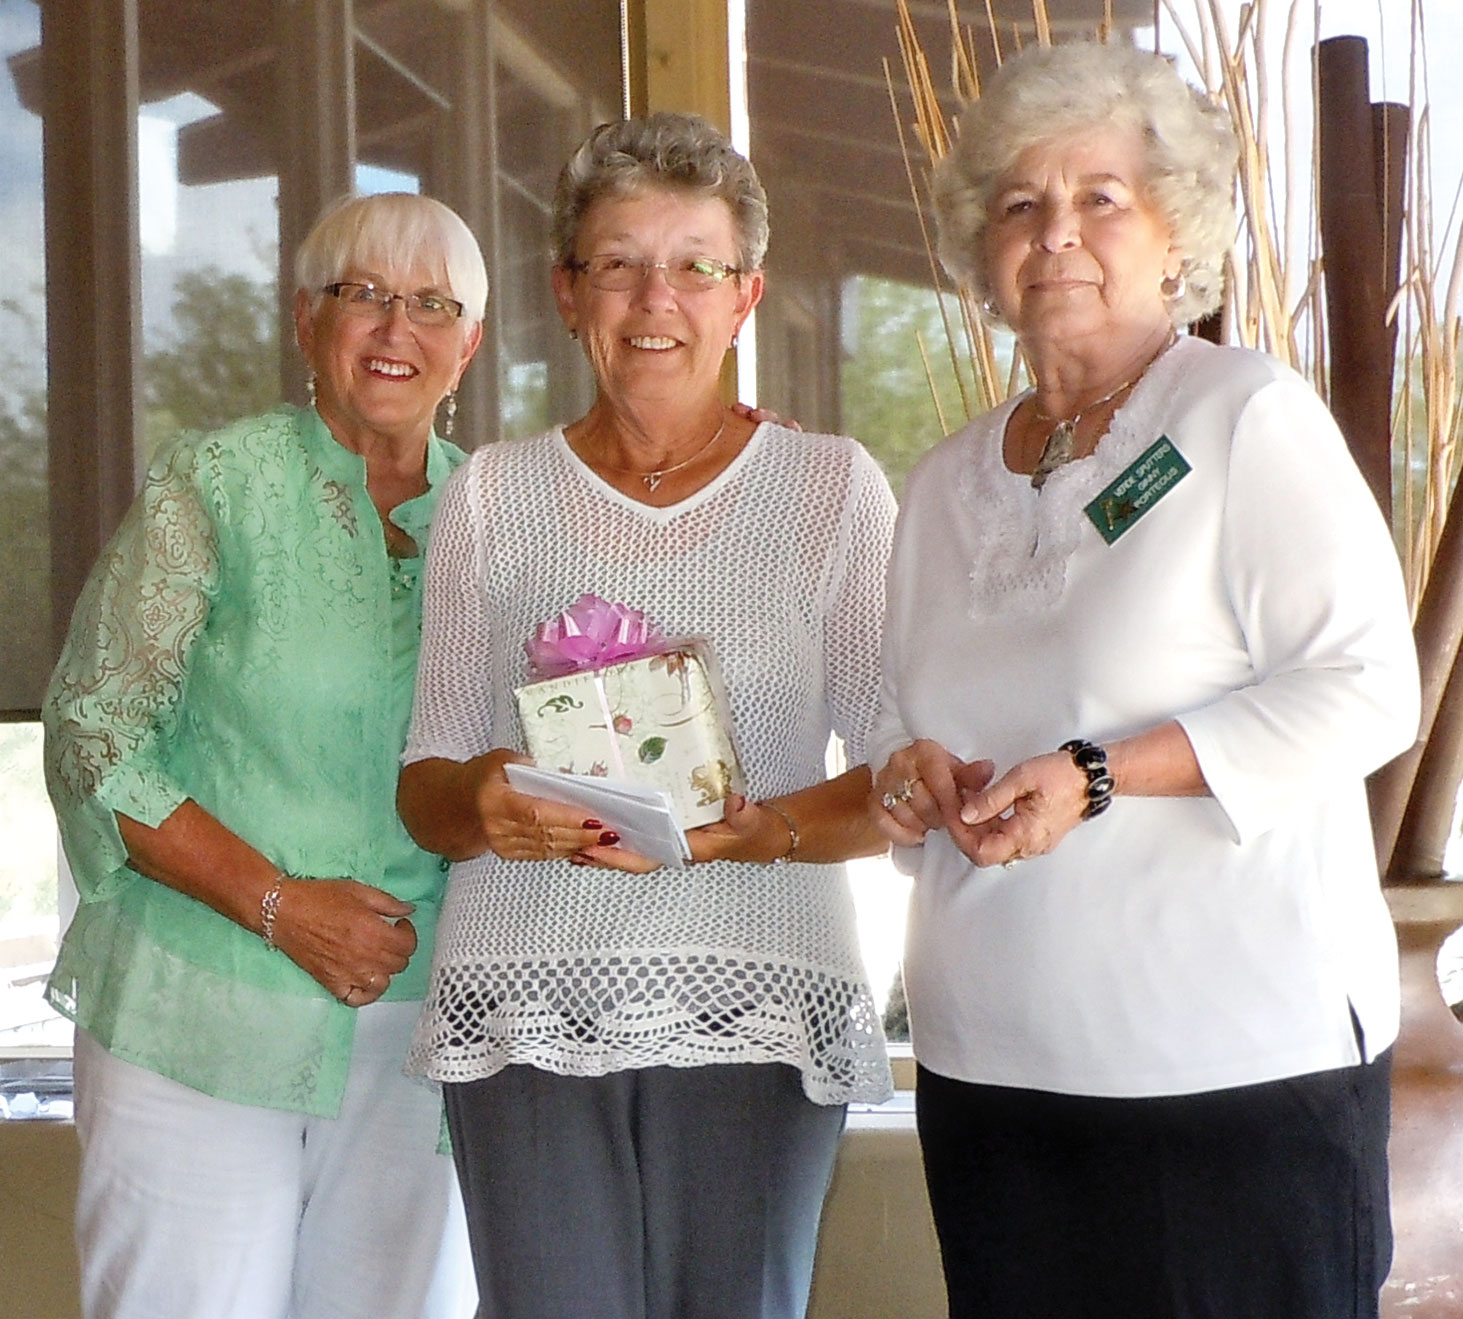 Barbara Rempel receives the 2015 Spirit Award from outgoing Co-presidents Elaine Ackerman and Ginny Porteous